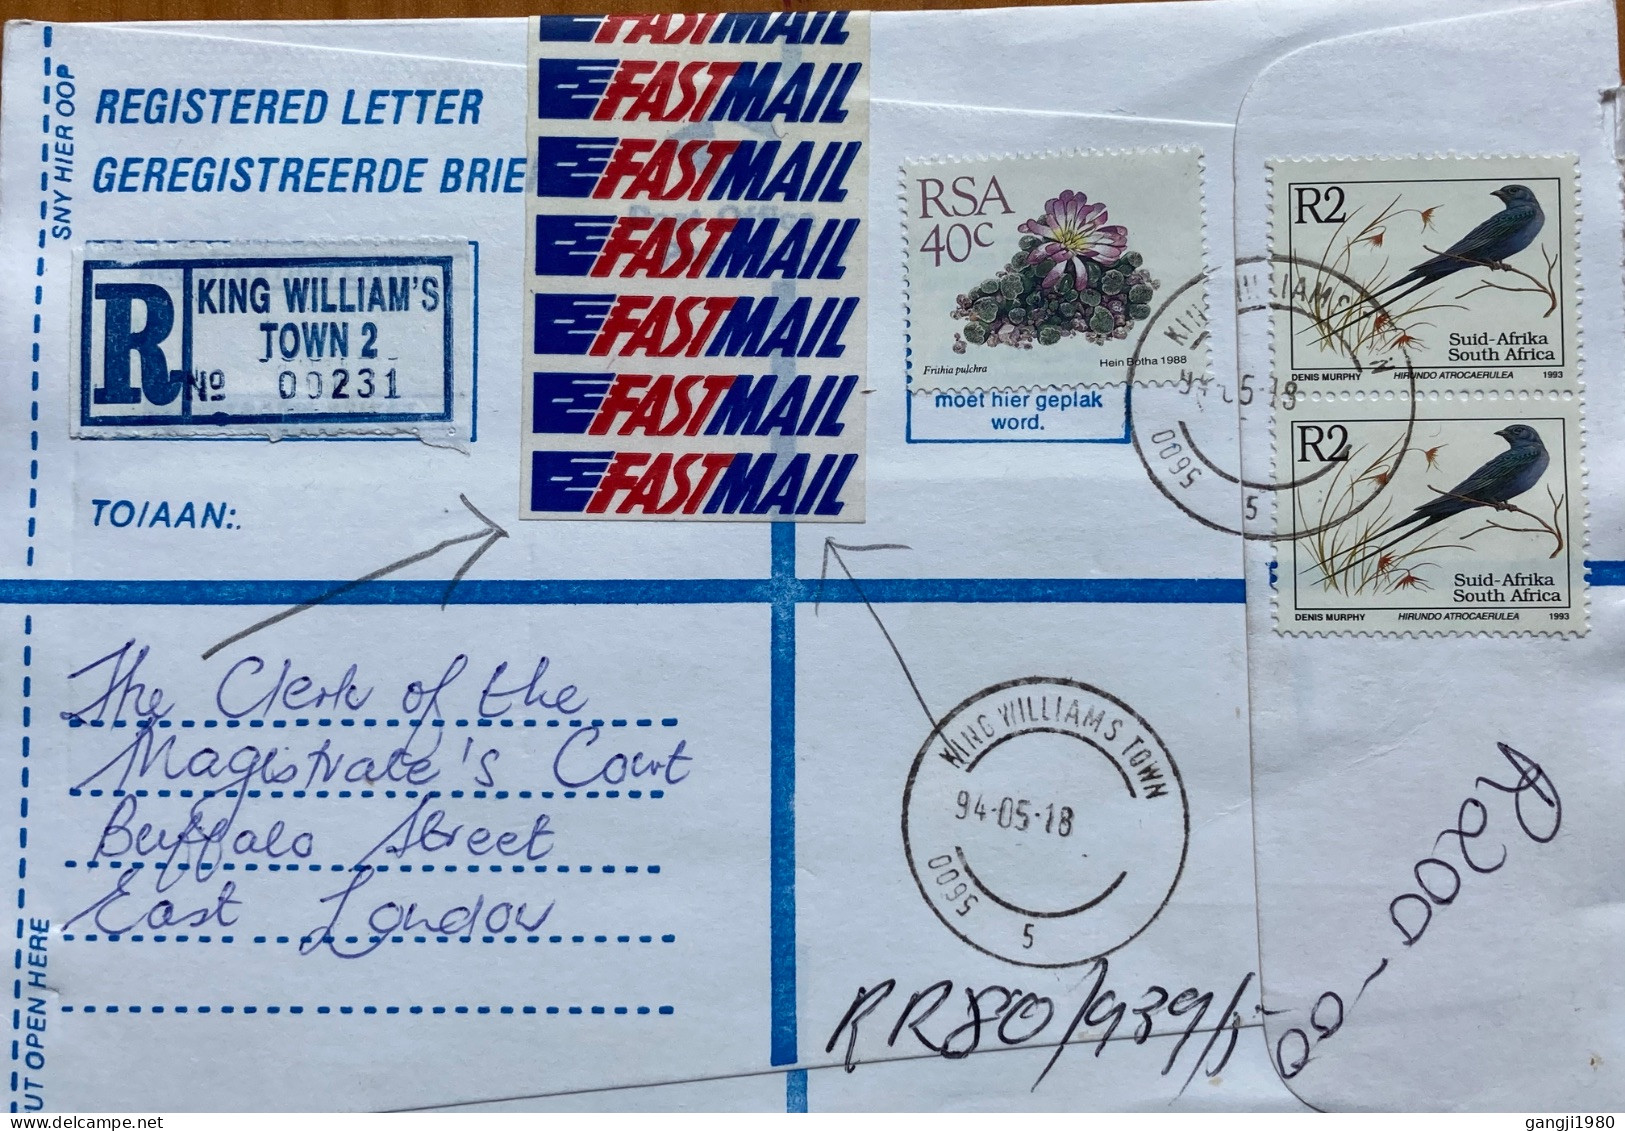 SOUTH AFRICA-1994, REGISTER STATIONERY, COVER USED, 3 SIDE OPEN, VIGNETTE FASTMAIL LABEL, BIRD & FLOWER, KING WILLIAM'S - Storia Postale